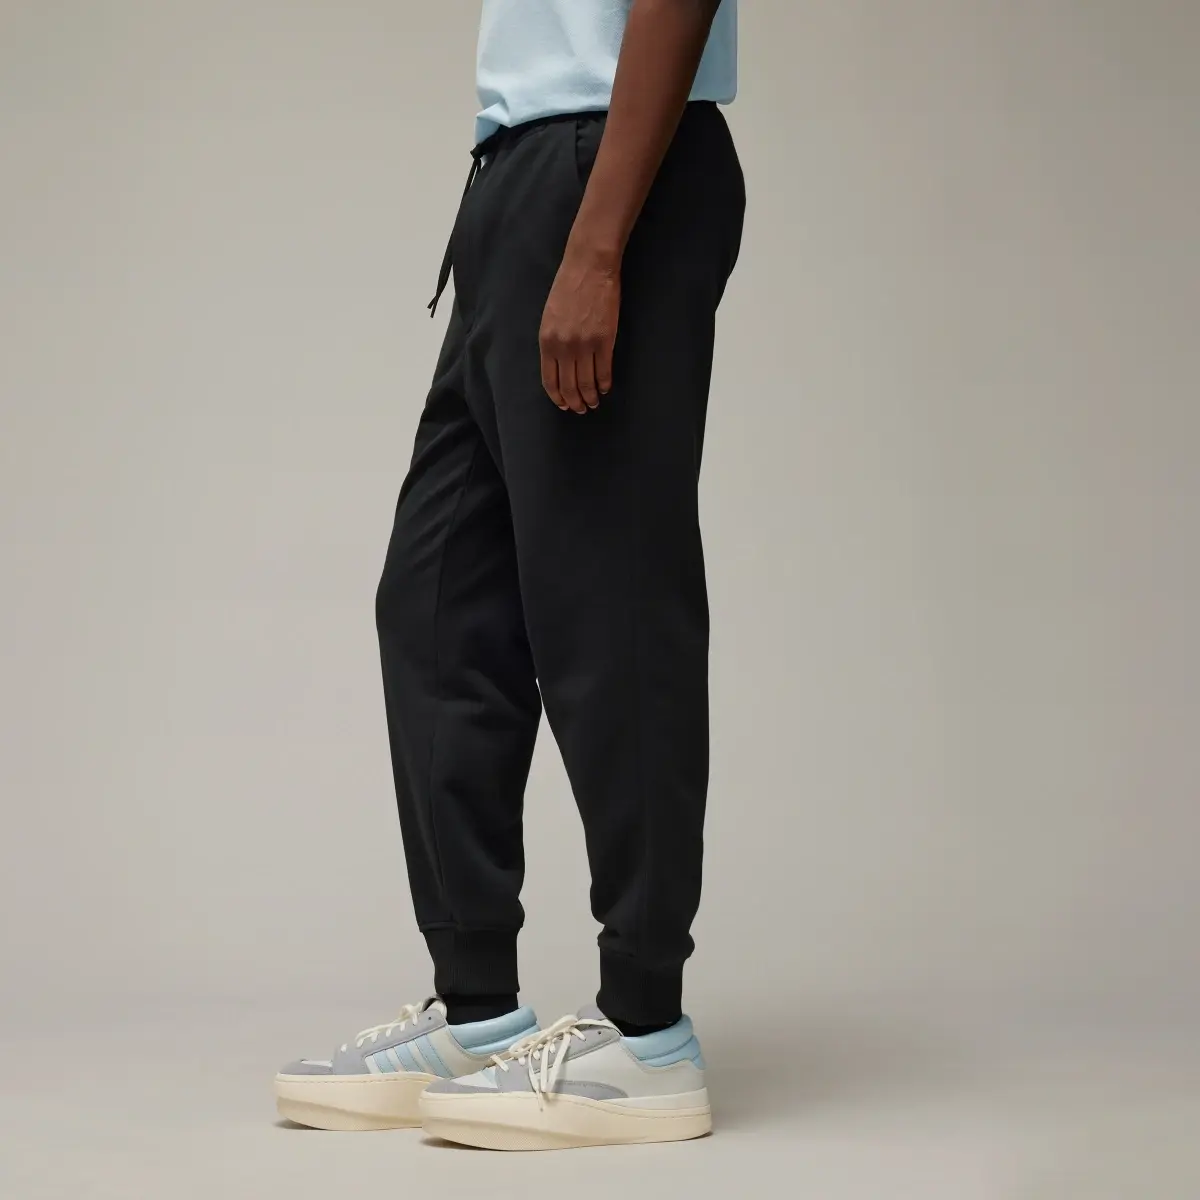 Adidas Y-3 French Terry Cuffed Pants. 2